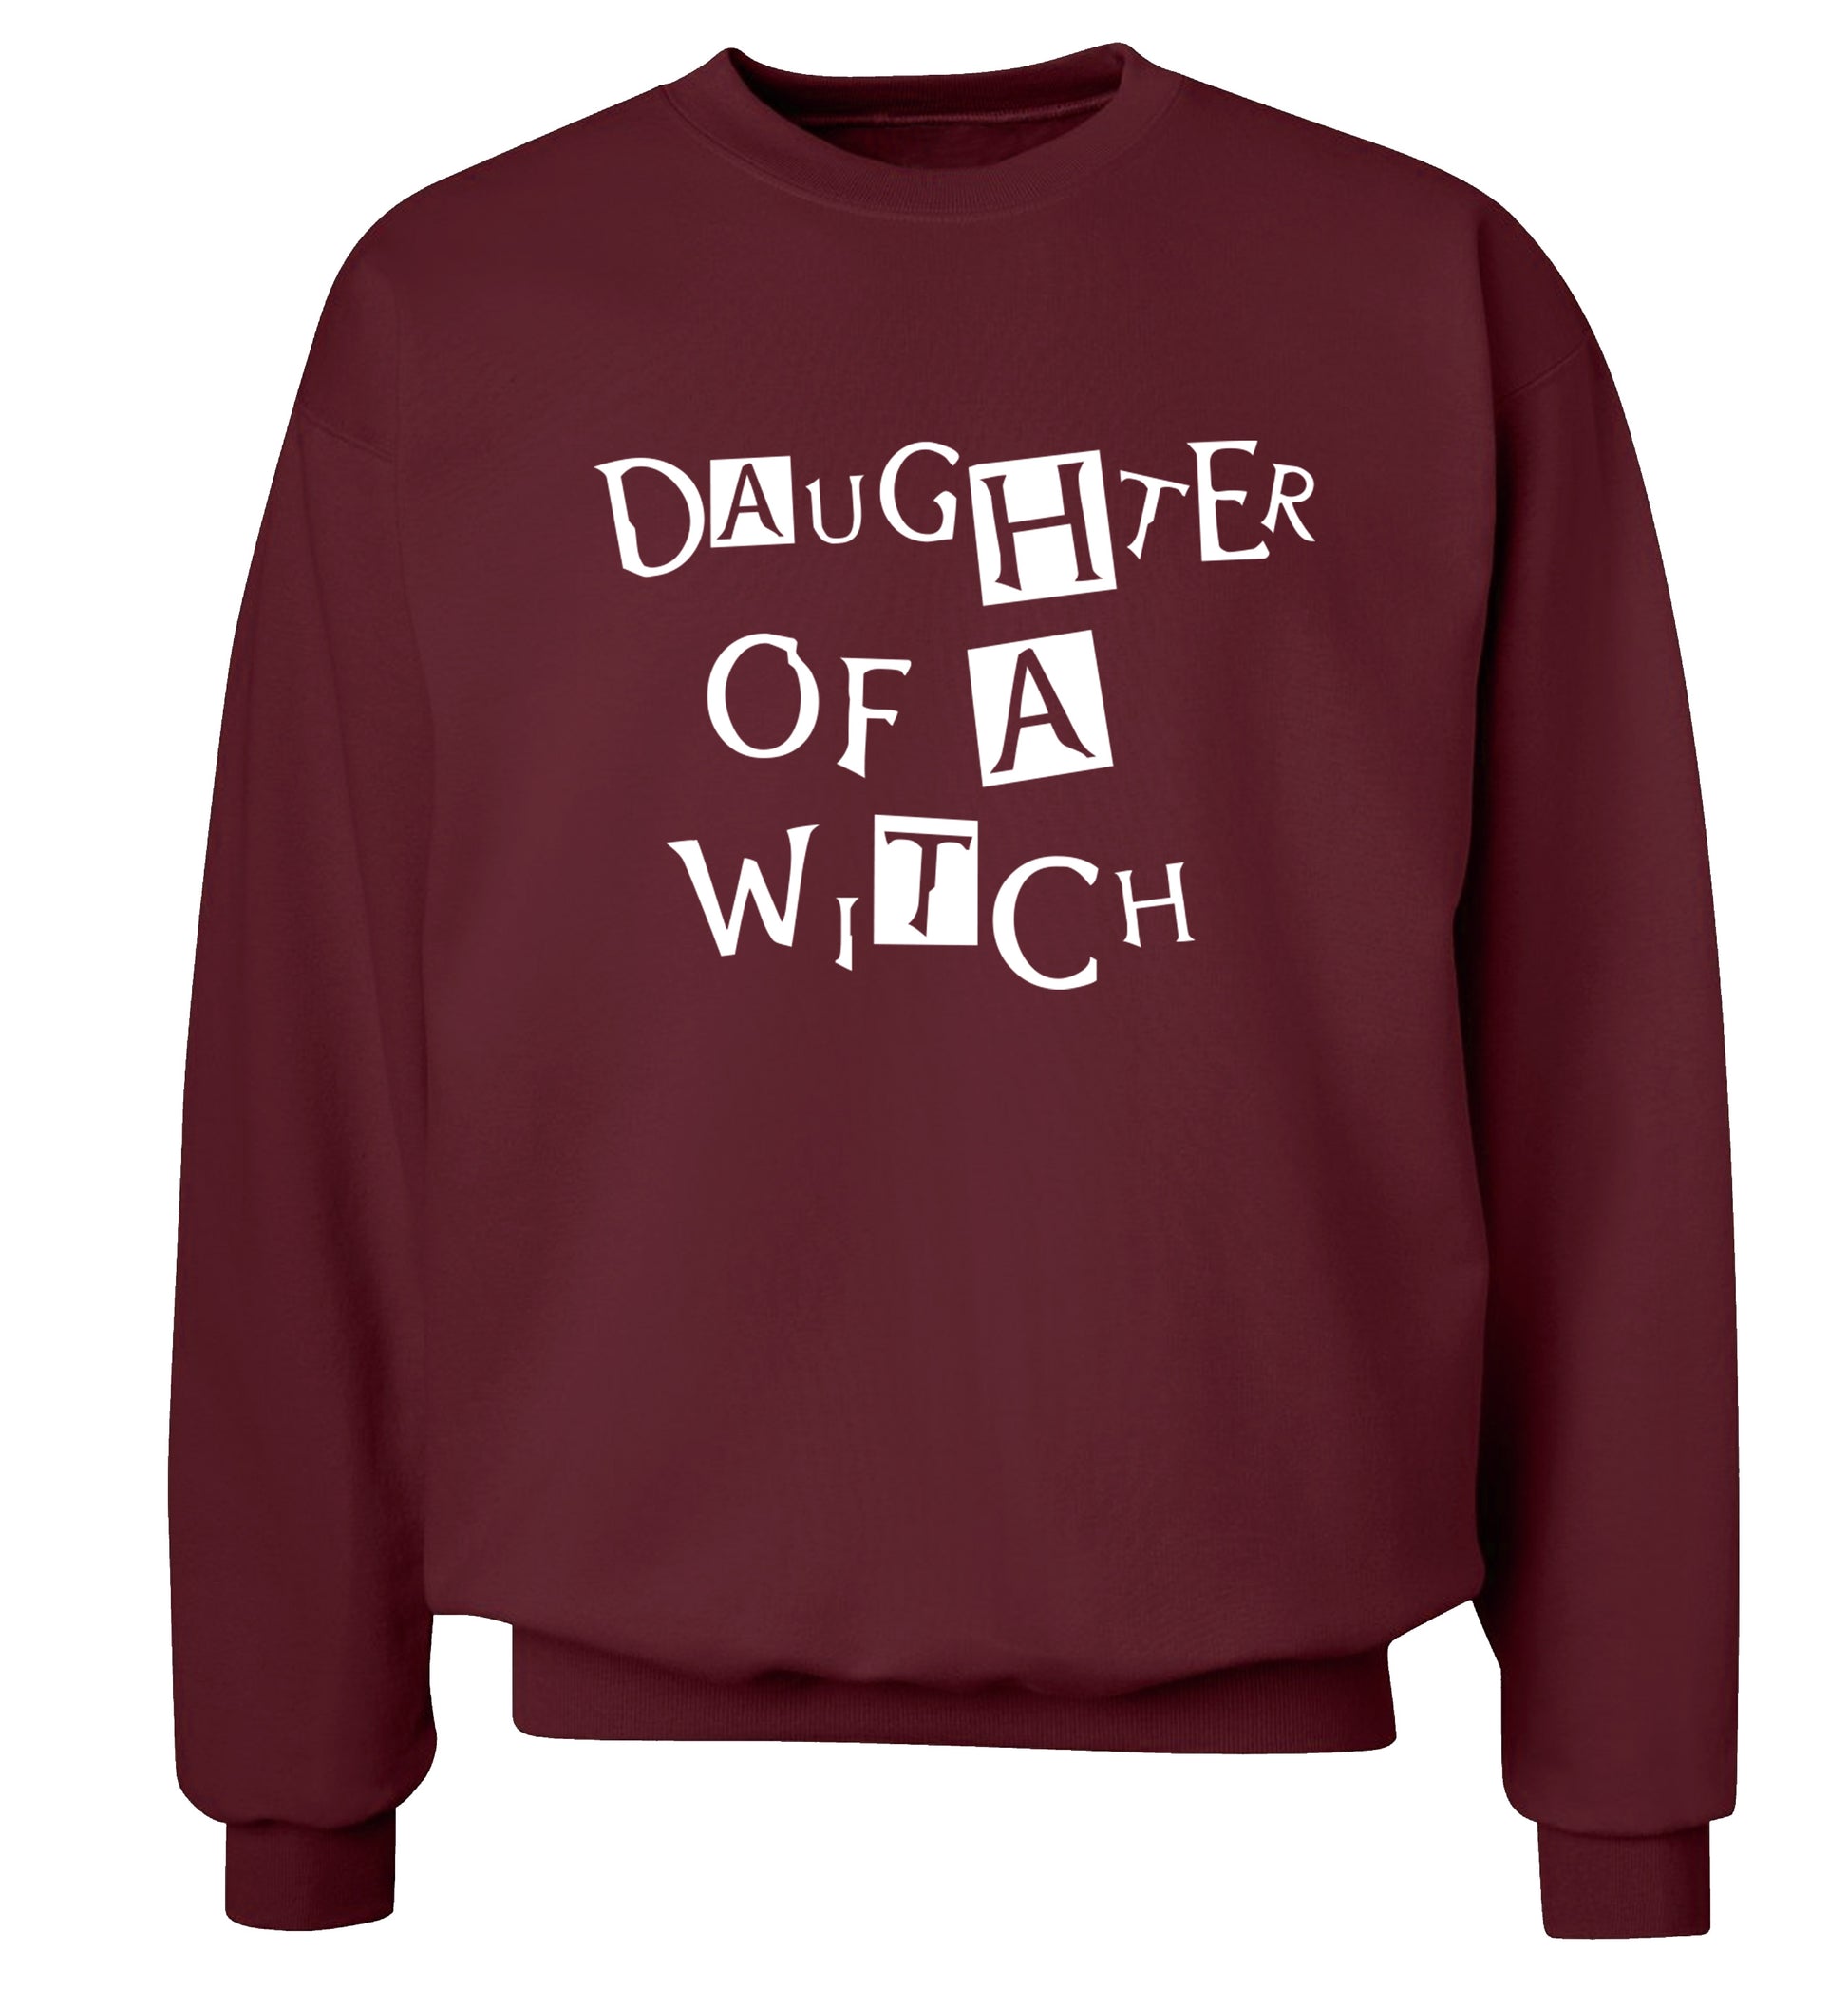 Daughter of a witch Adult's unisex maroon Sweater 2XL